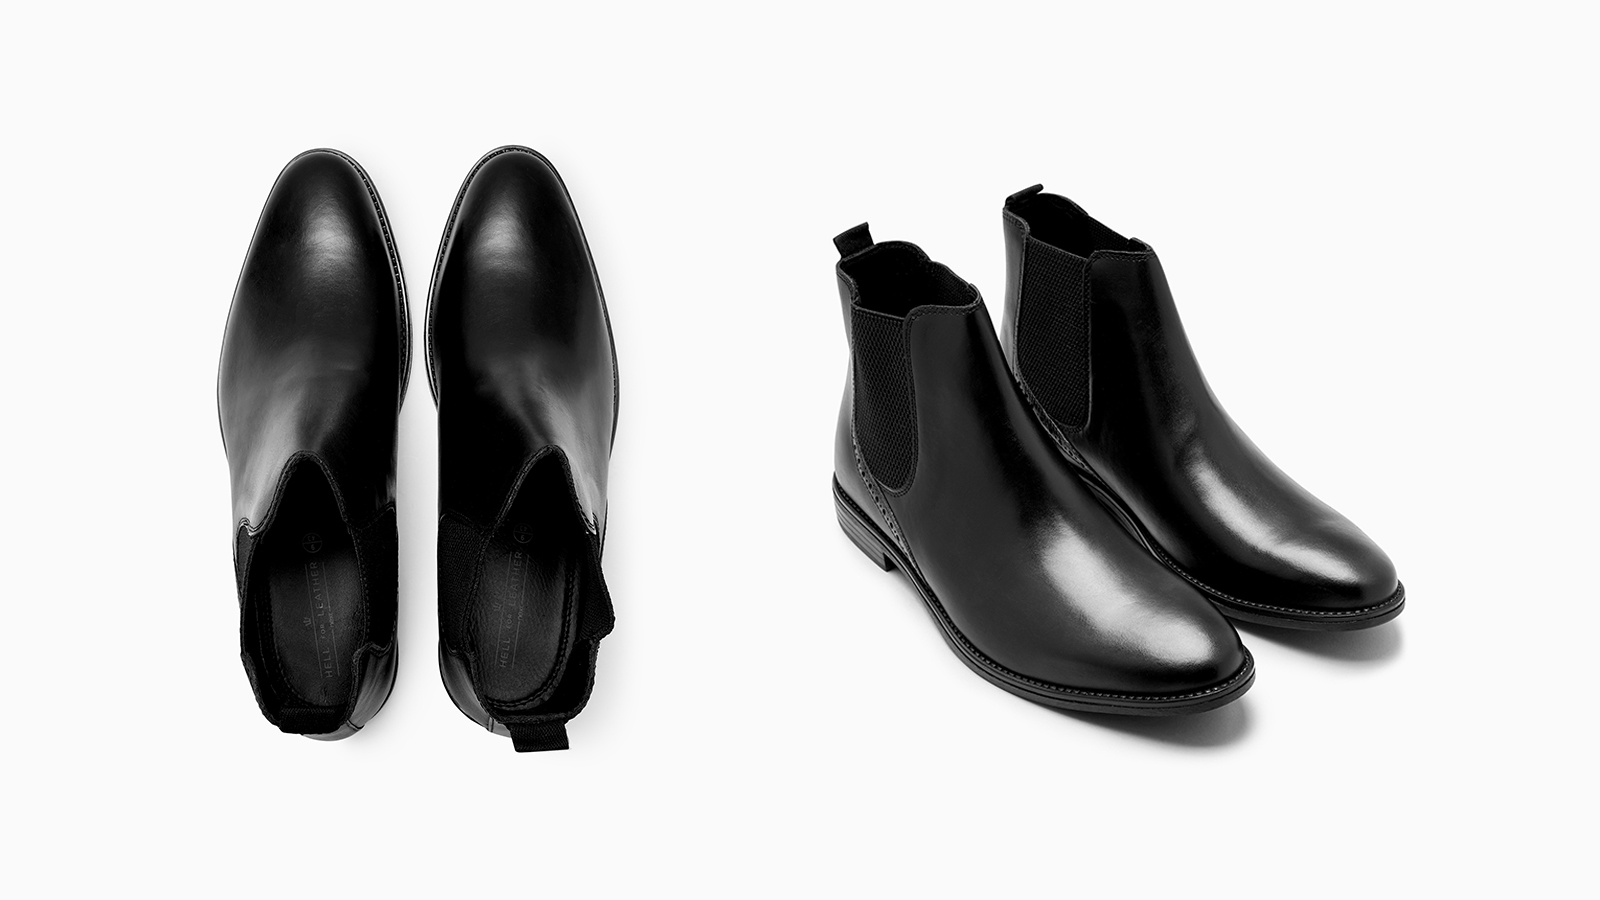 Thw winter boots you need now - Chelsea boots